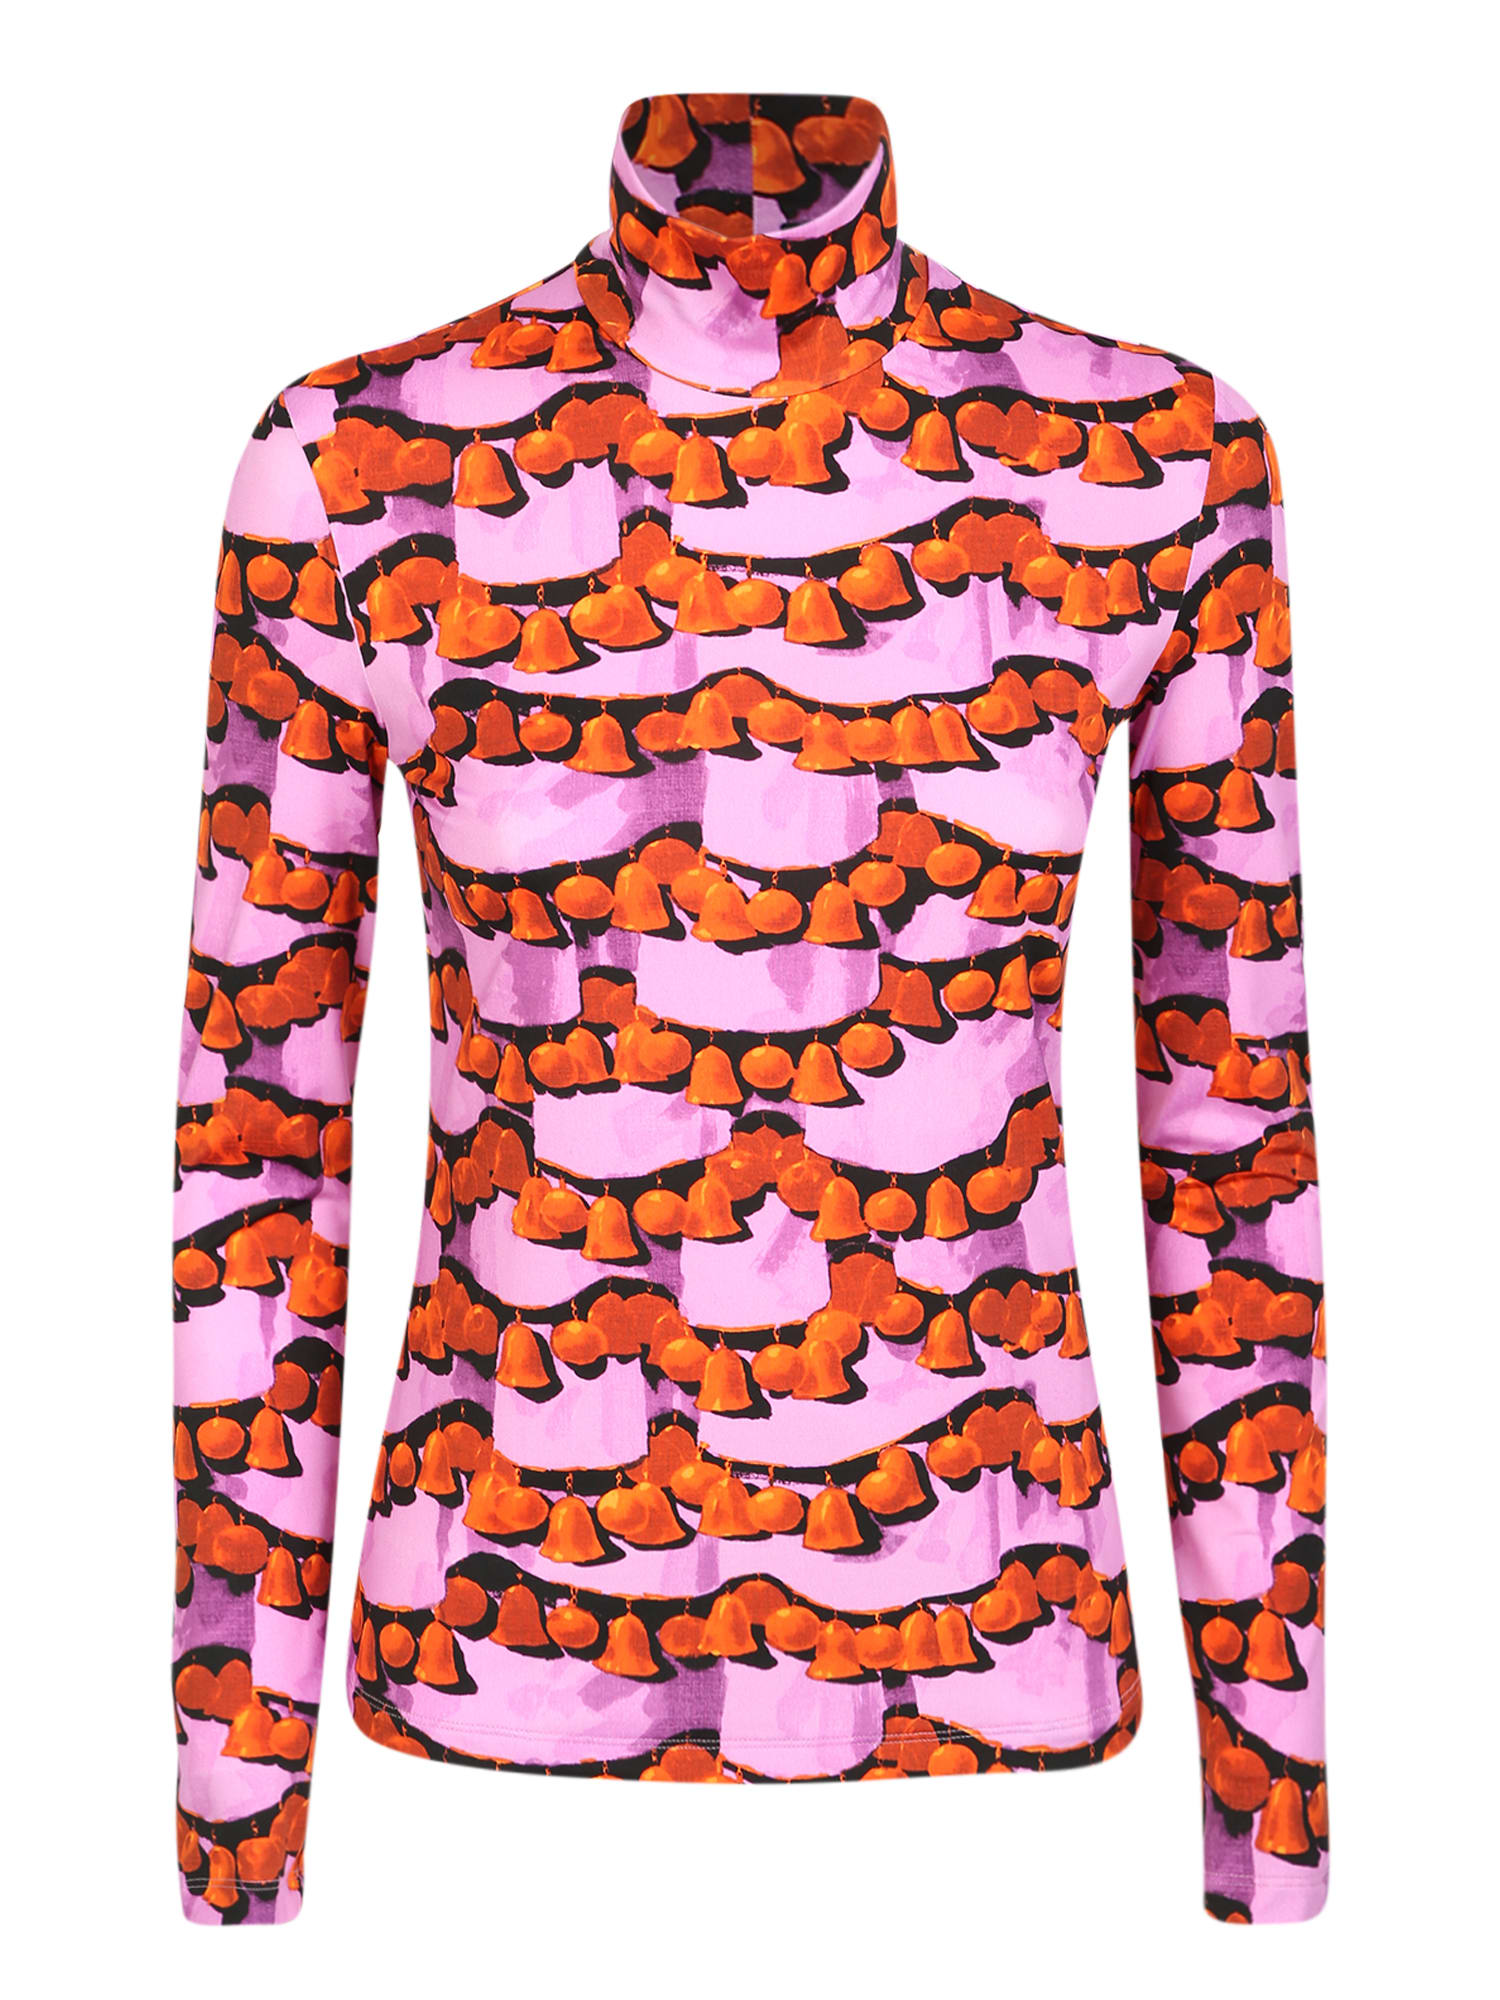 La Doublej Adds Its Signature Maximalist Style To The Humble Turtleneck, By Adorning It With This Graphic Print